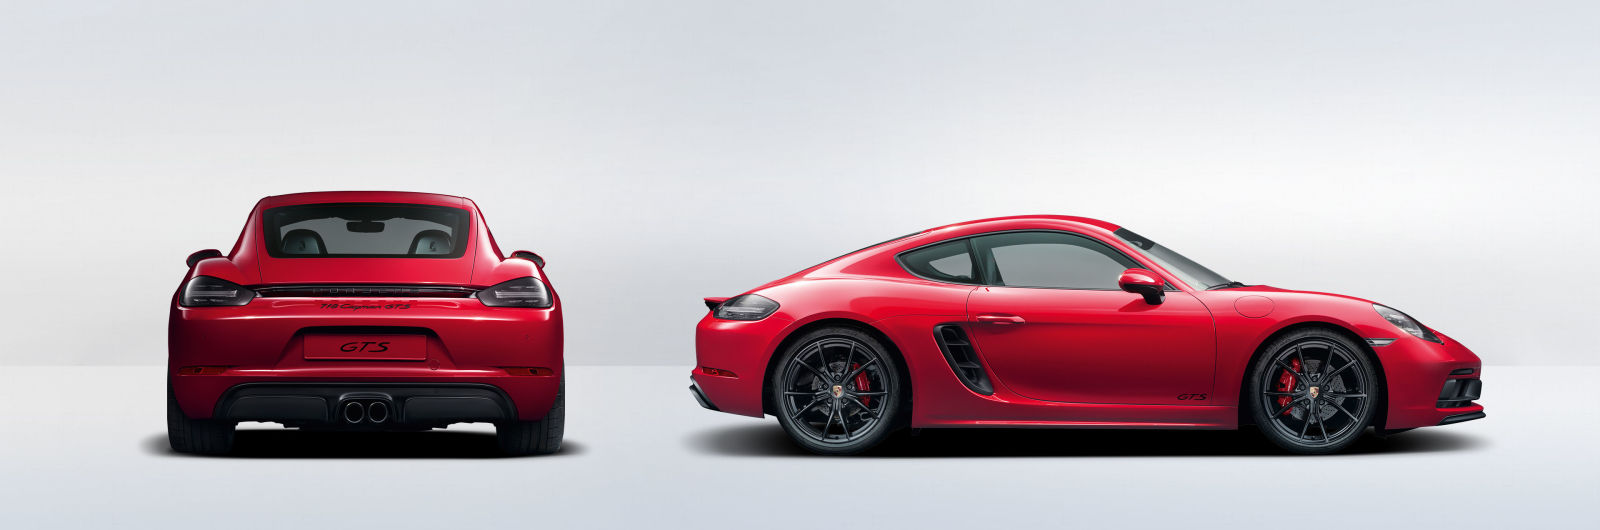 Illustration for article titled Porsche 718 GTS